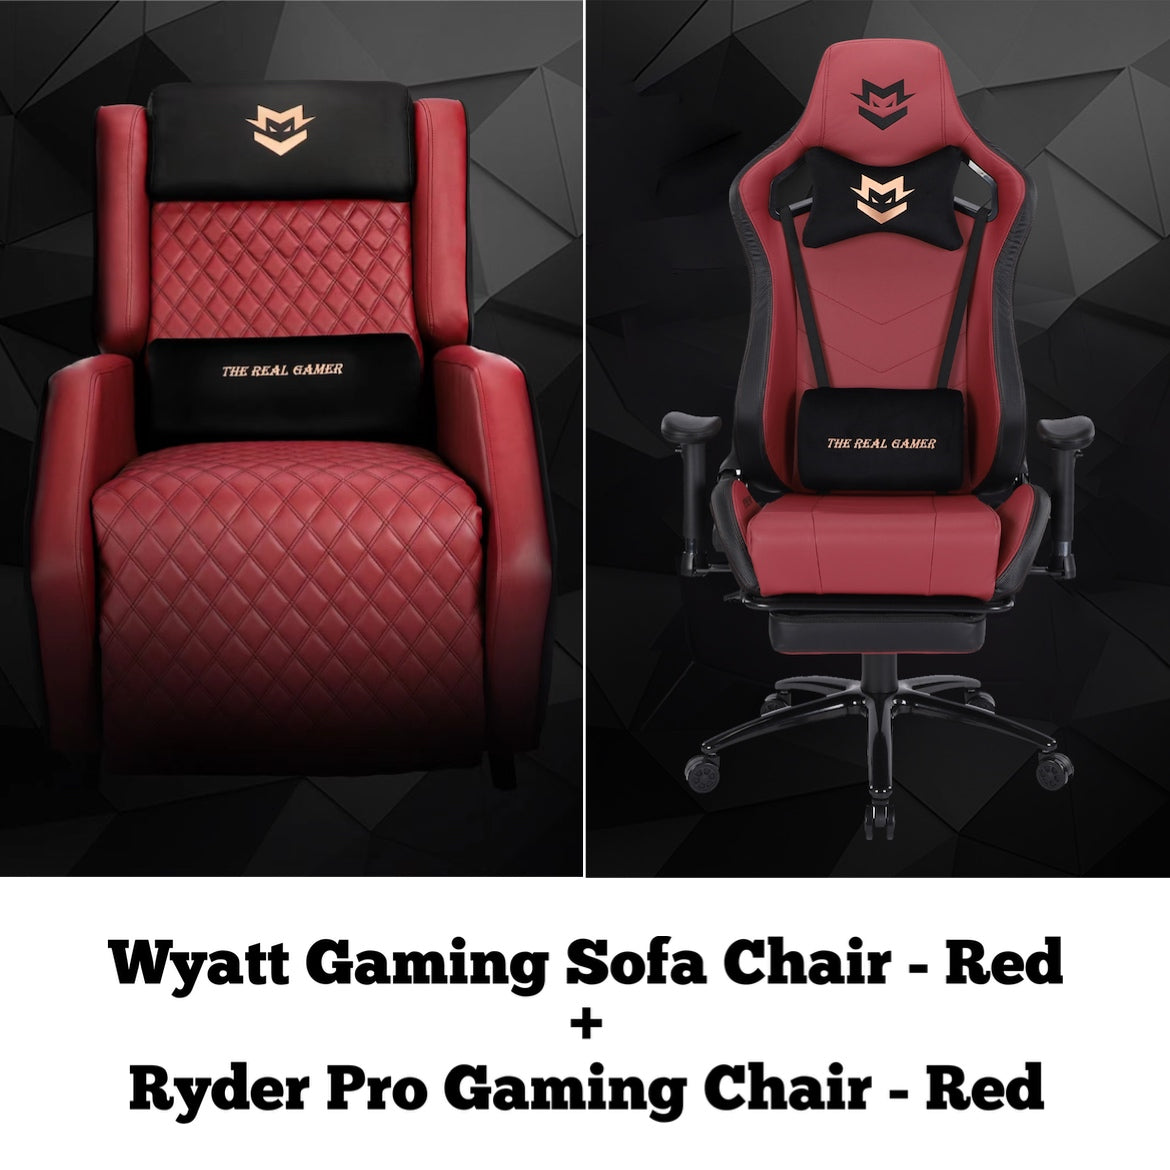 Wyatt Gaming Sofa Chair + Ryder Pro Gaming Chair - Red – The Real Gamer